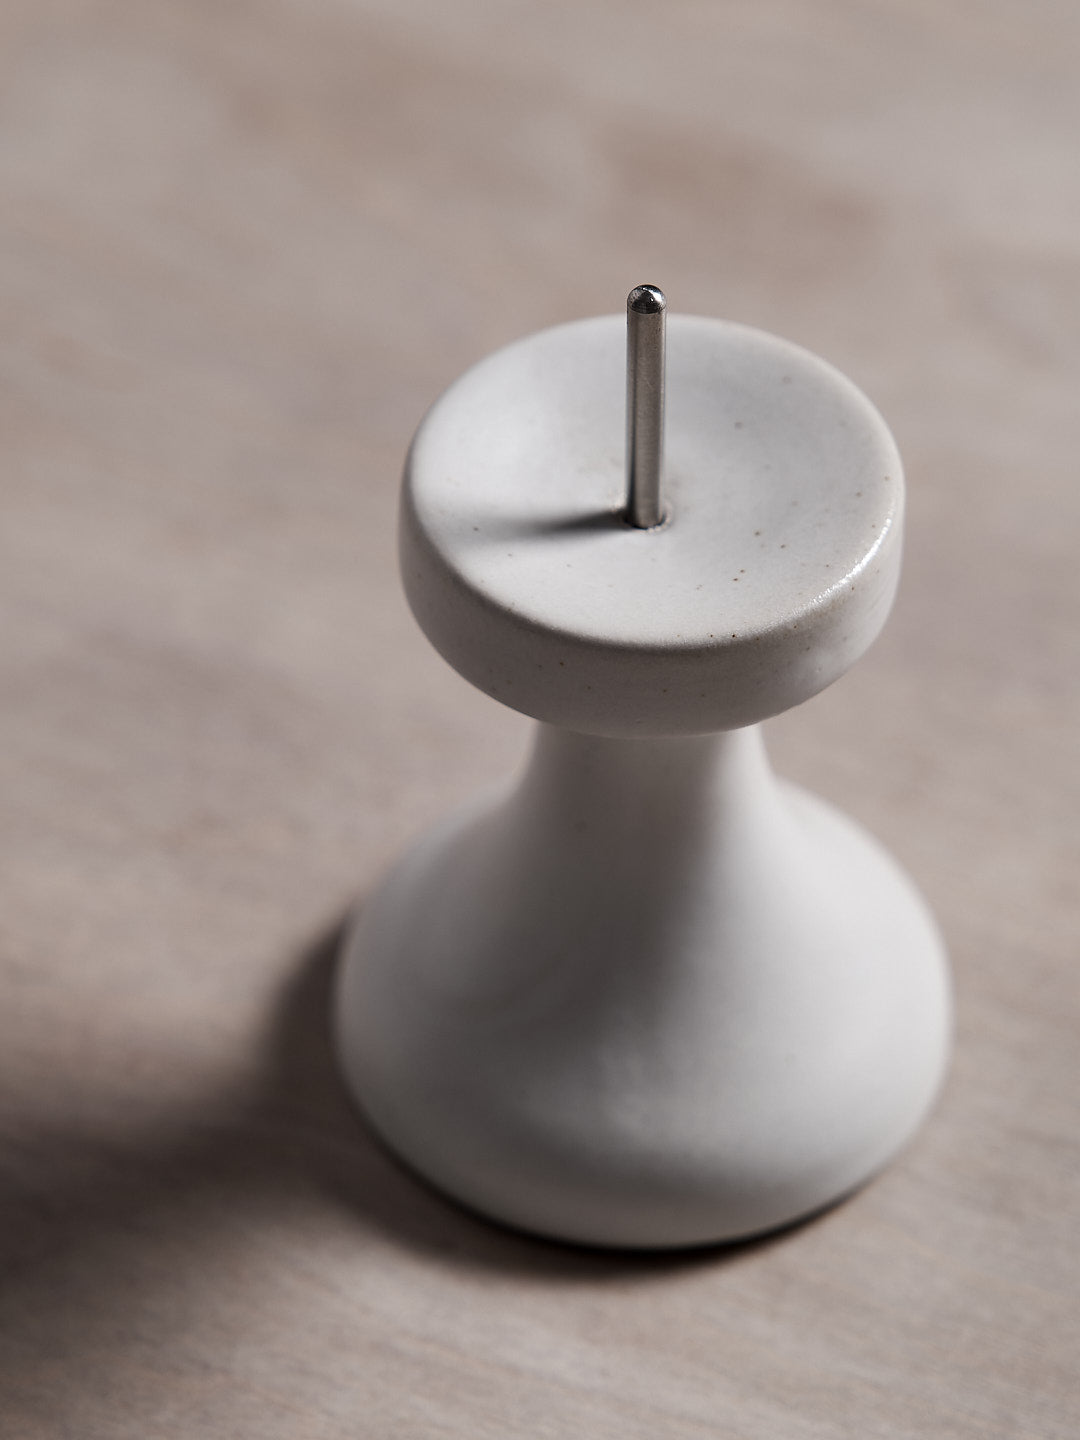 A small white FLUID – Stoneware Candle Holder by Takazawa on a wooden table.